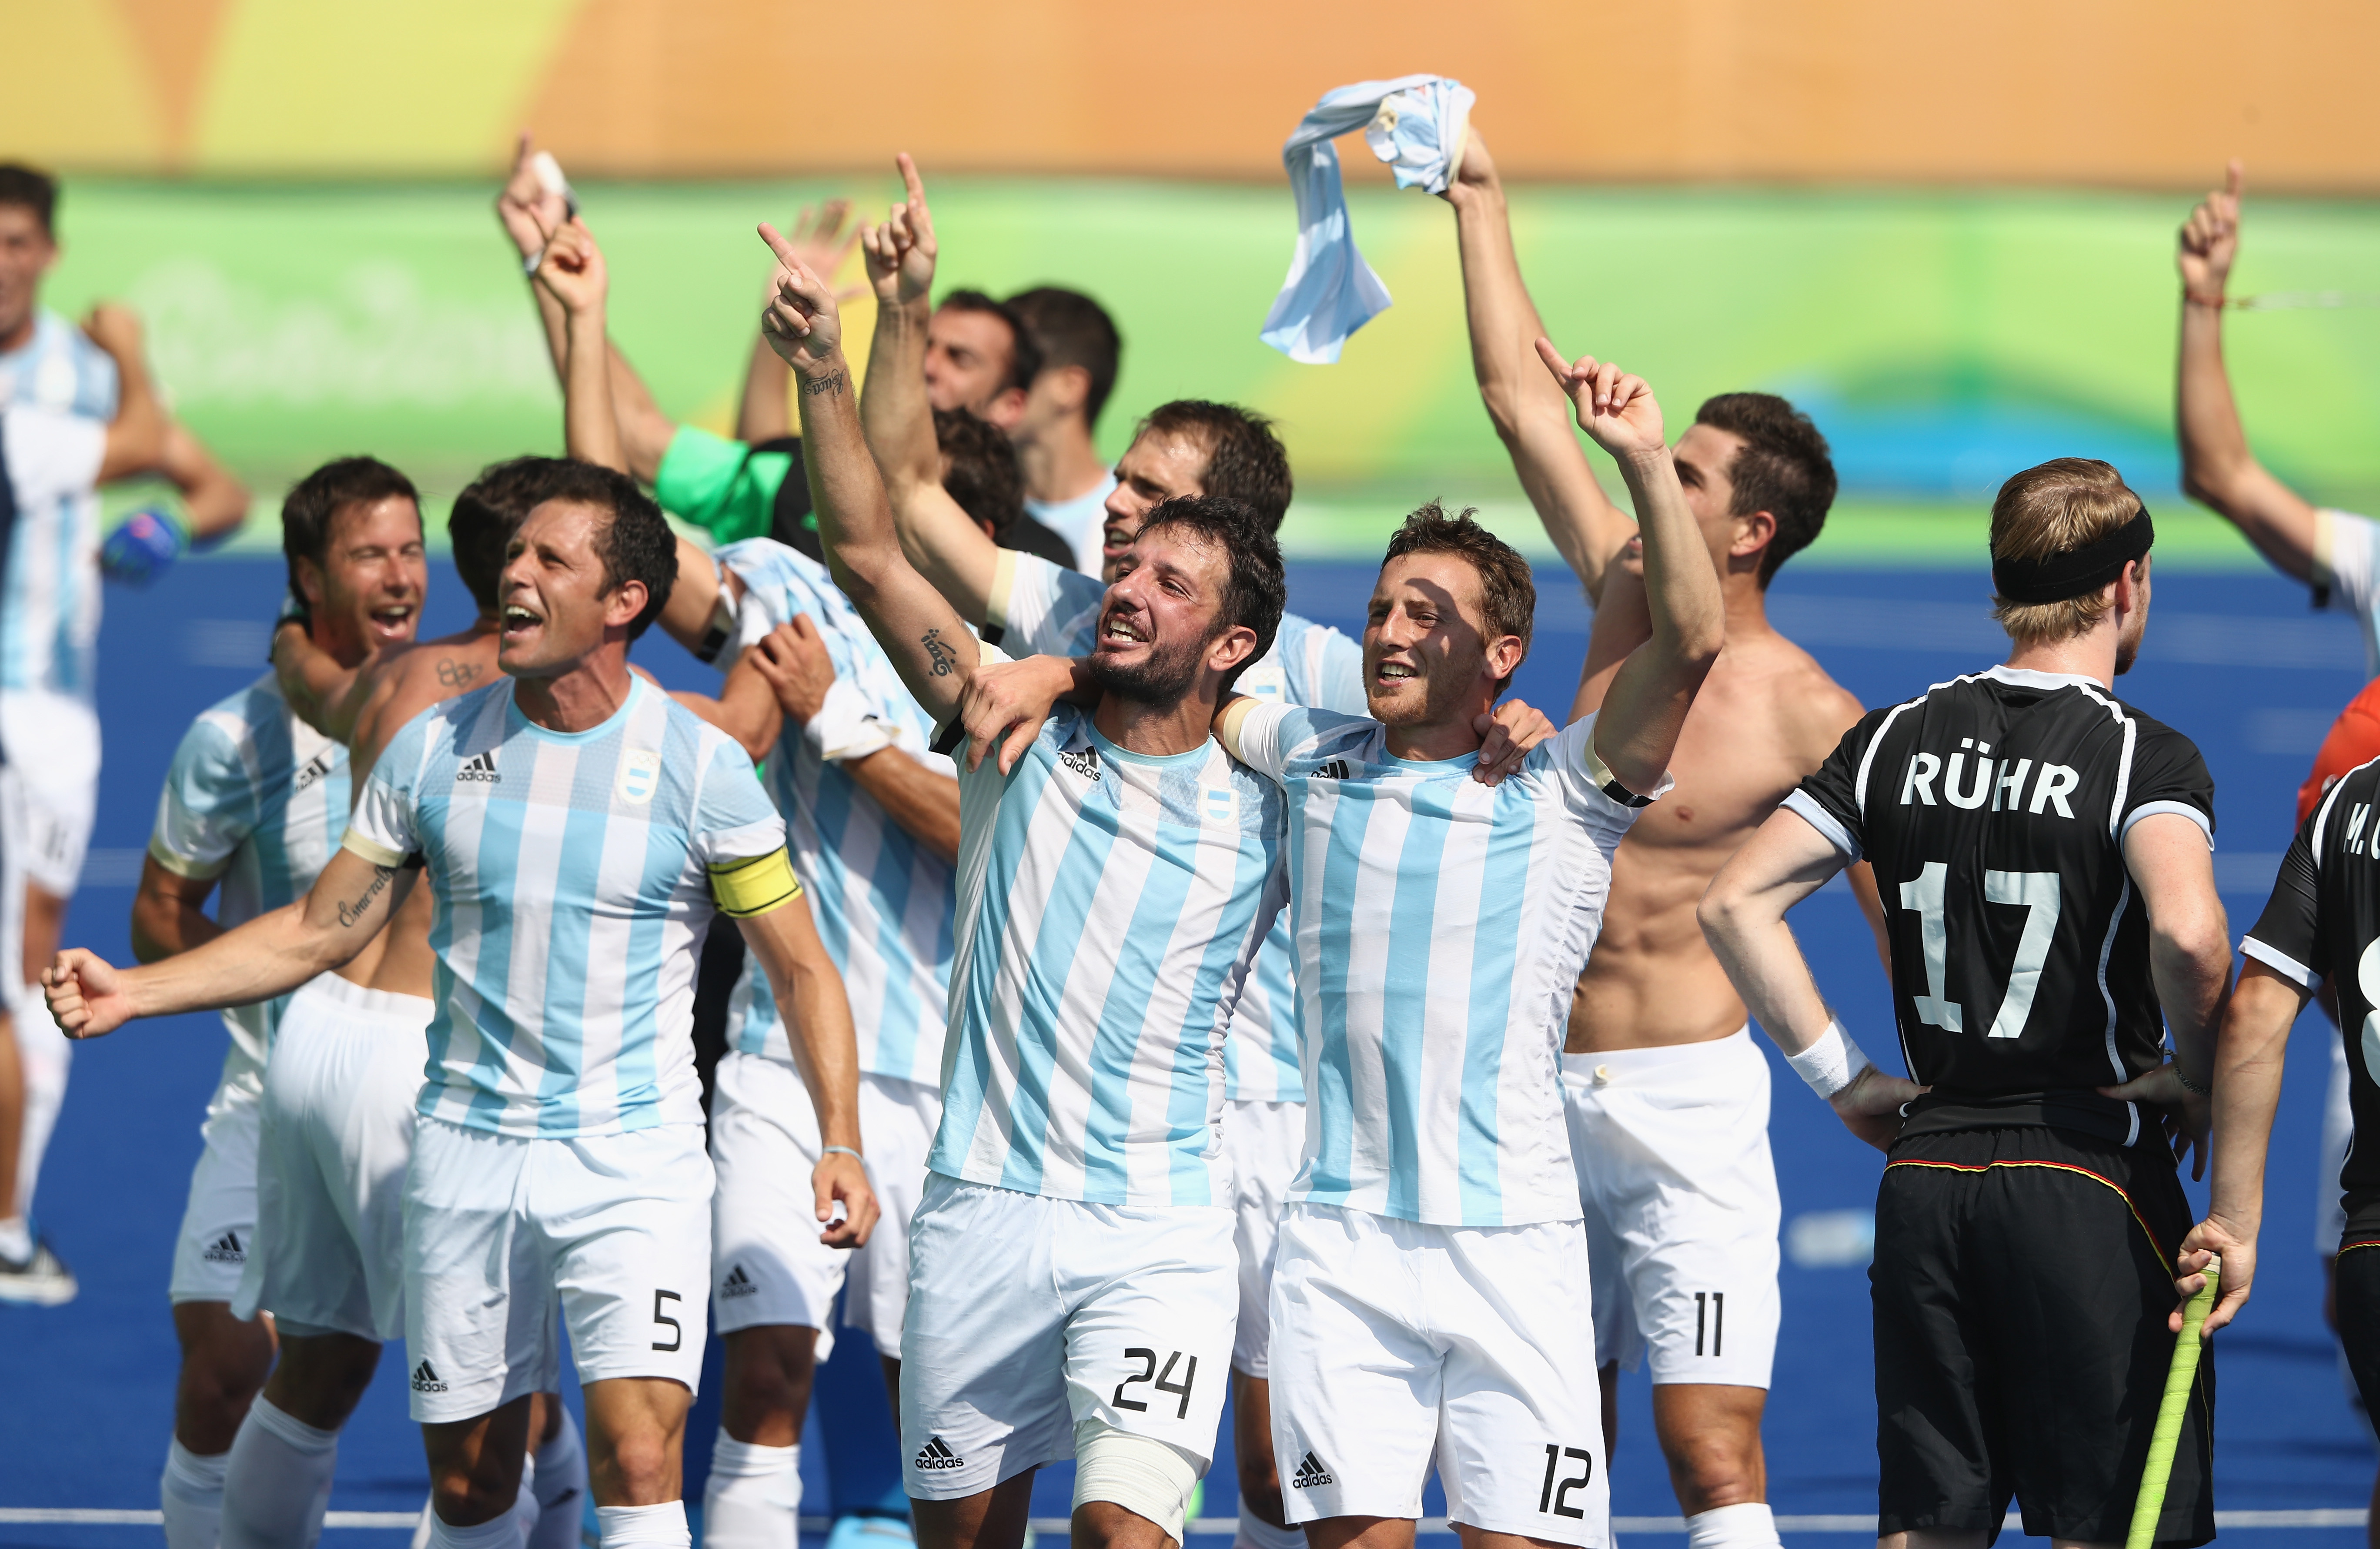 Rio Hockey Roundup | Argentina and Belgium to fight for gold as Germany’s reign end on day 11